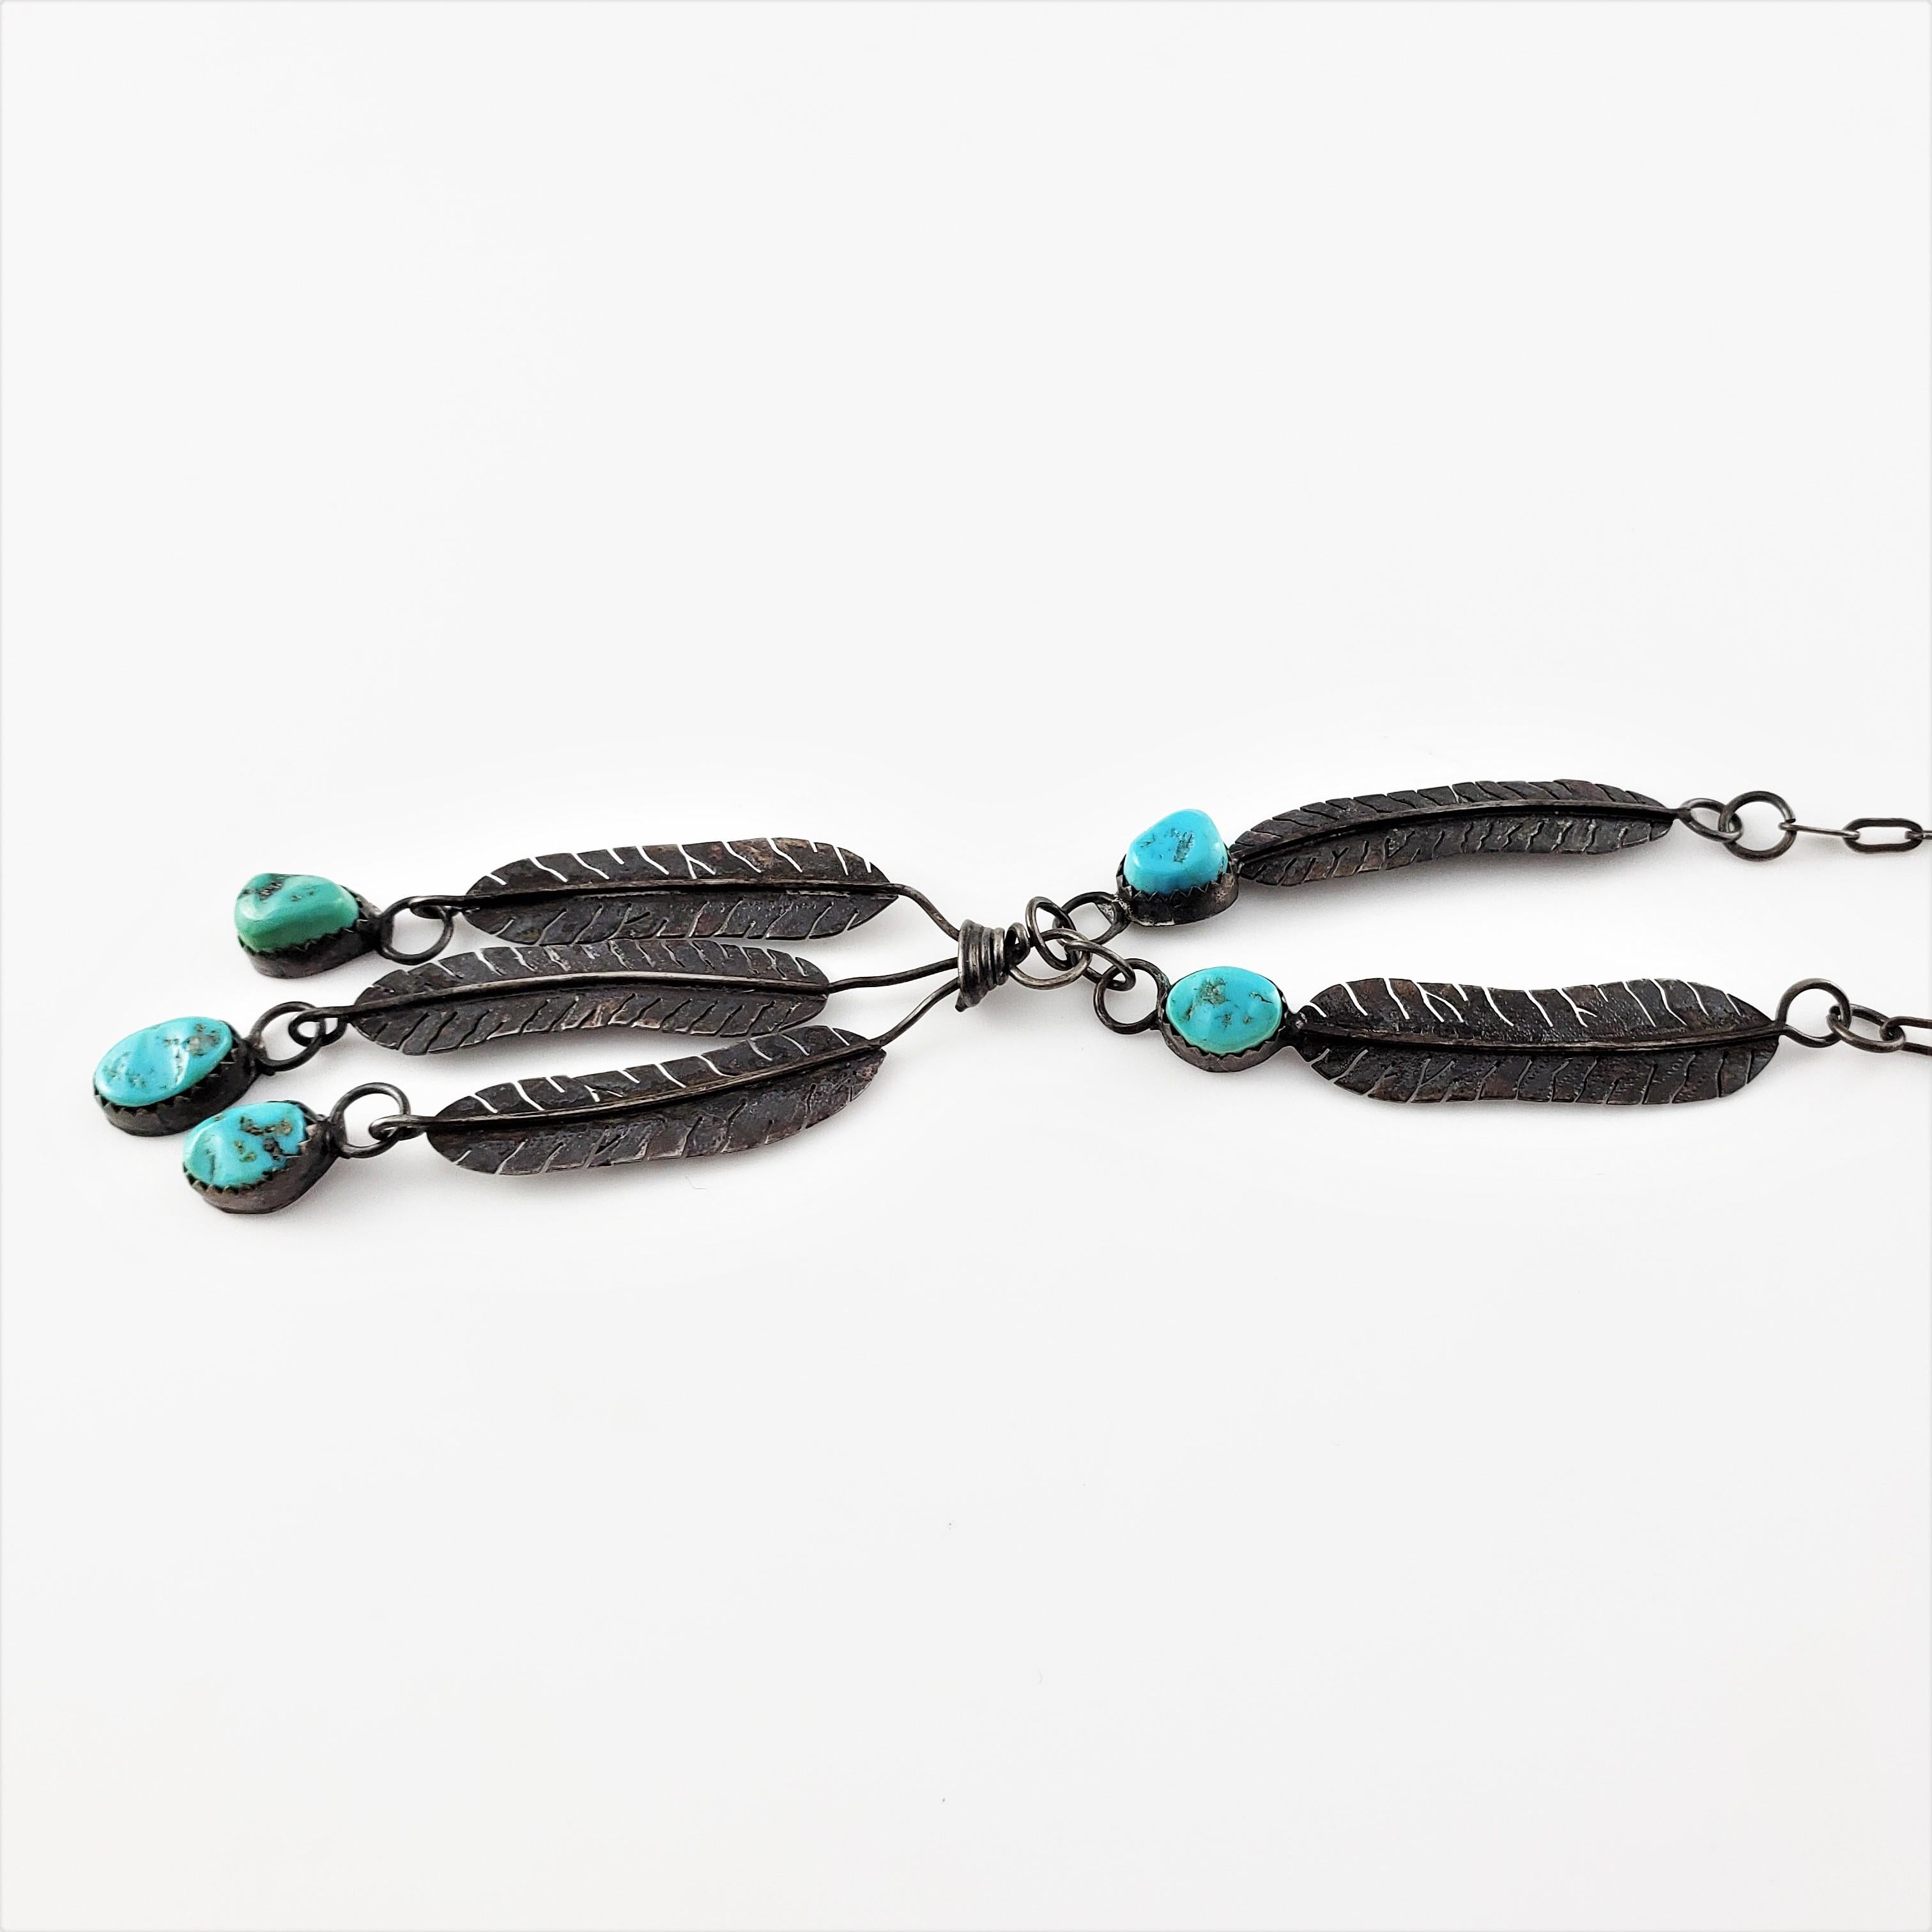 Vintage Native American Sterling Silver Turquoise Feather Dangle Pendant Necklace-

This lovely Native American dangling feather necklace features five turquoise stones (approximately 8 mm each) set in sterling silver.

Size: 16 inches -